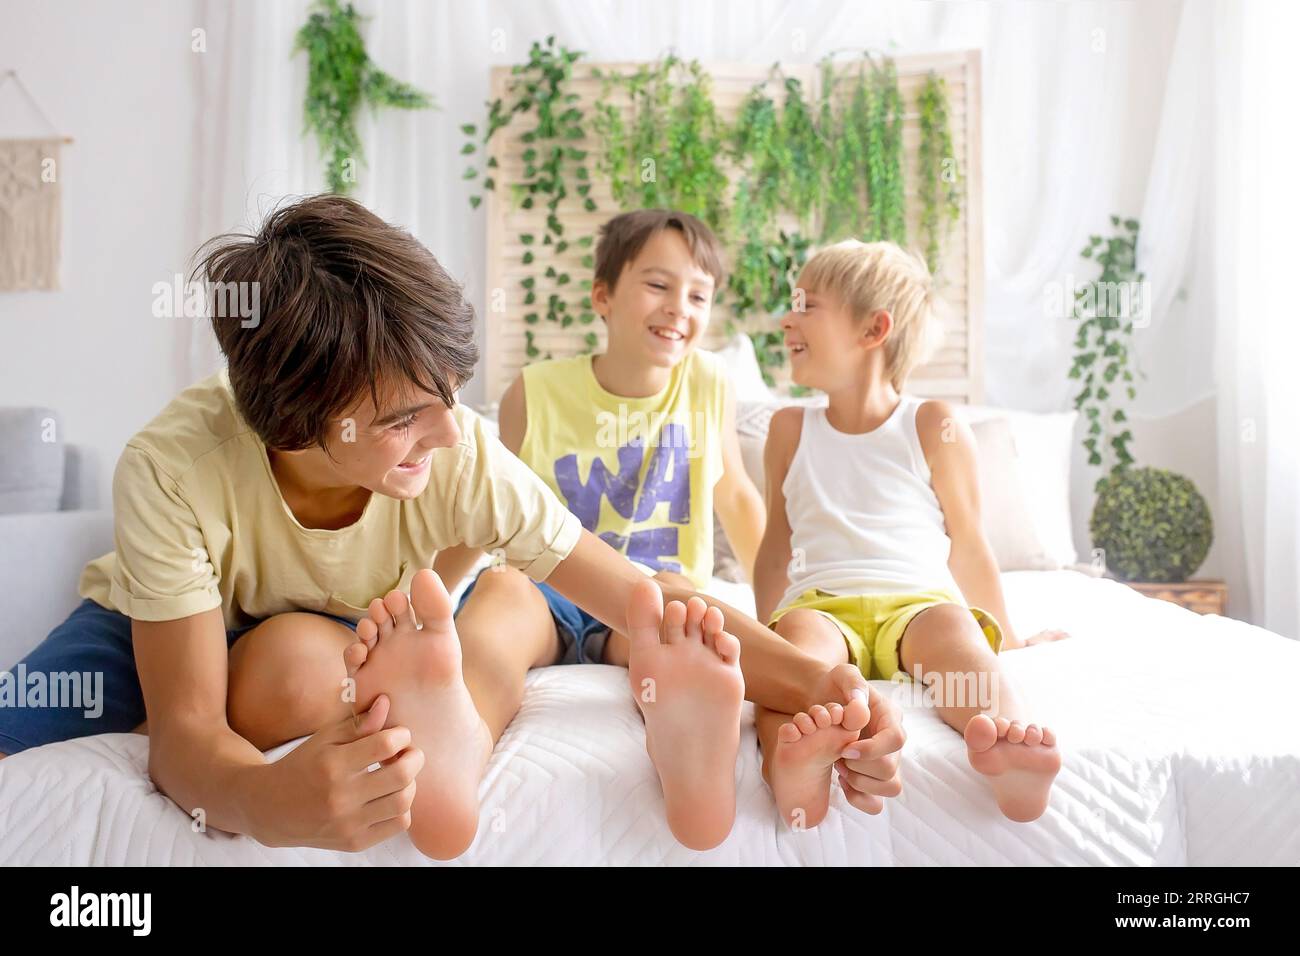 Happy positive children, tickling on the feet, having fun together, boy brothers at home having wonderful day of joy together Stock Photo